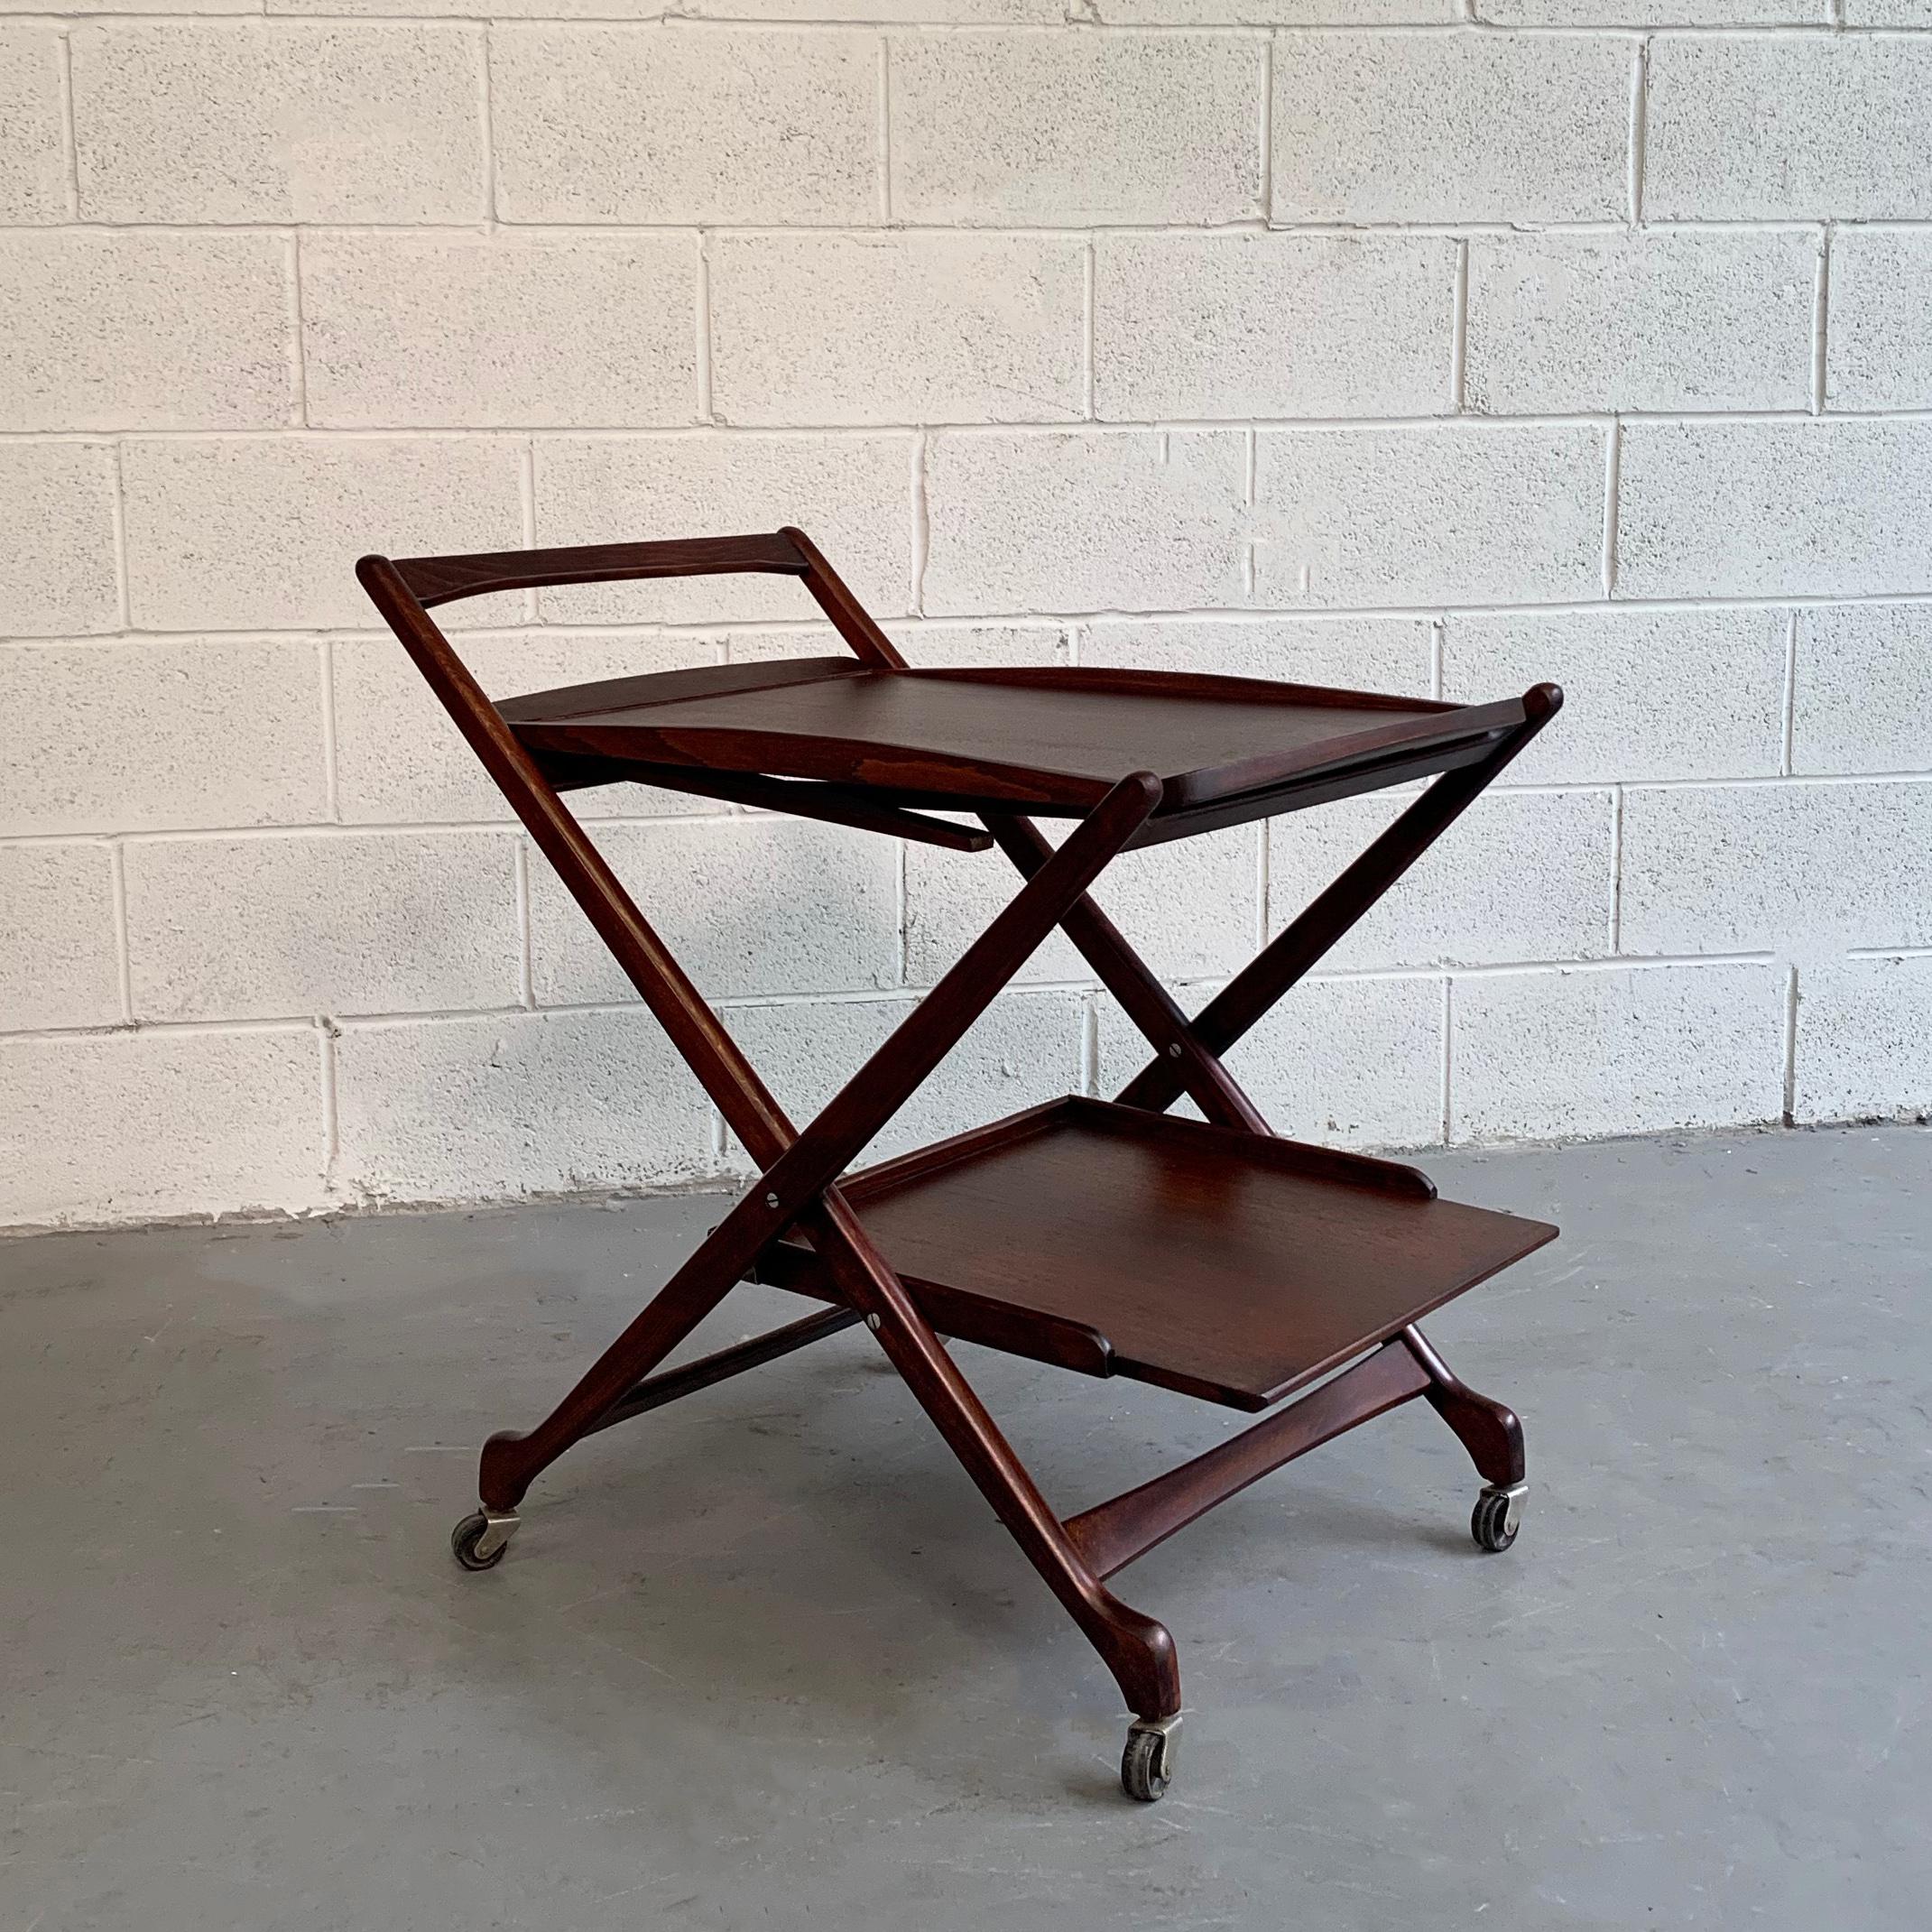 Mid-Century Modern, rolling, beechwood, serving / bar cart features 2 tiers at 26 inches height and 10 inches height with the top tier converting into an occasional table standing at 12 inches height.